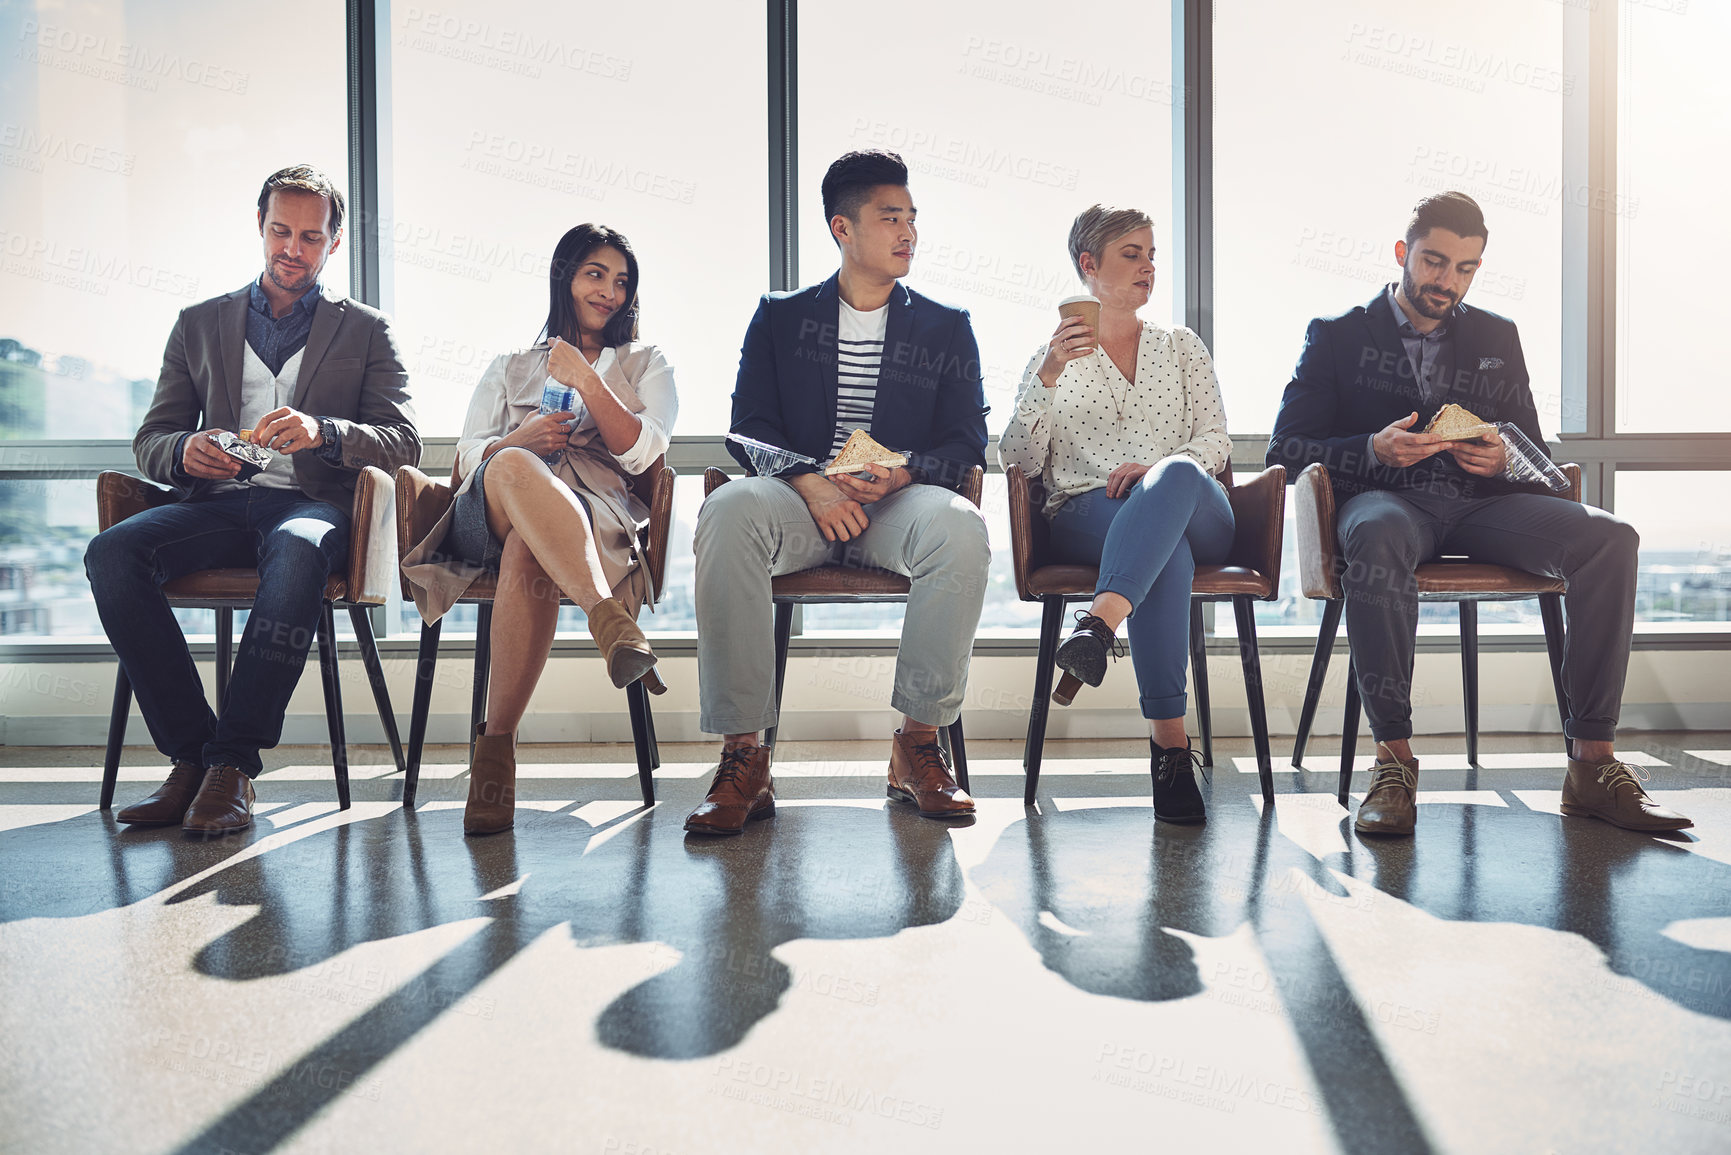 Buy stock photo Shot of a group of businesspeople taking a break while sitting in line in an office